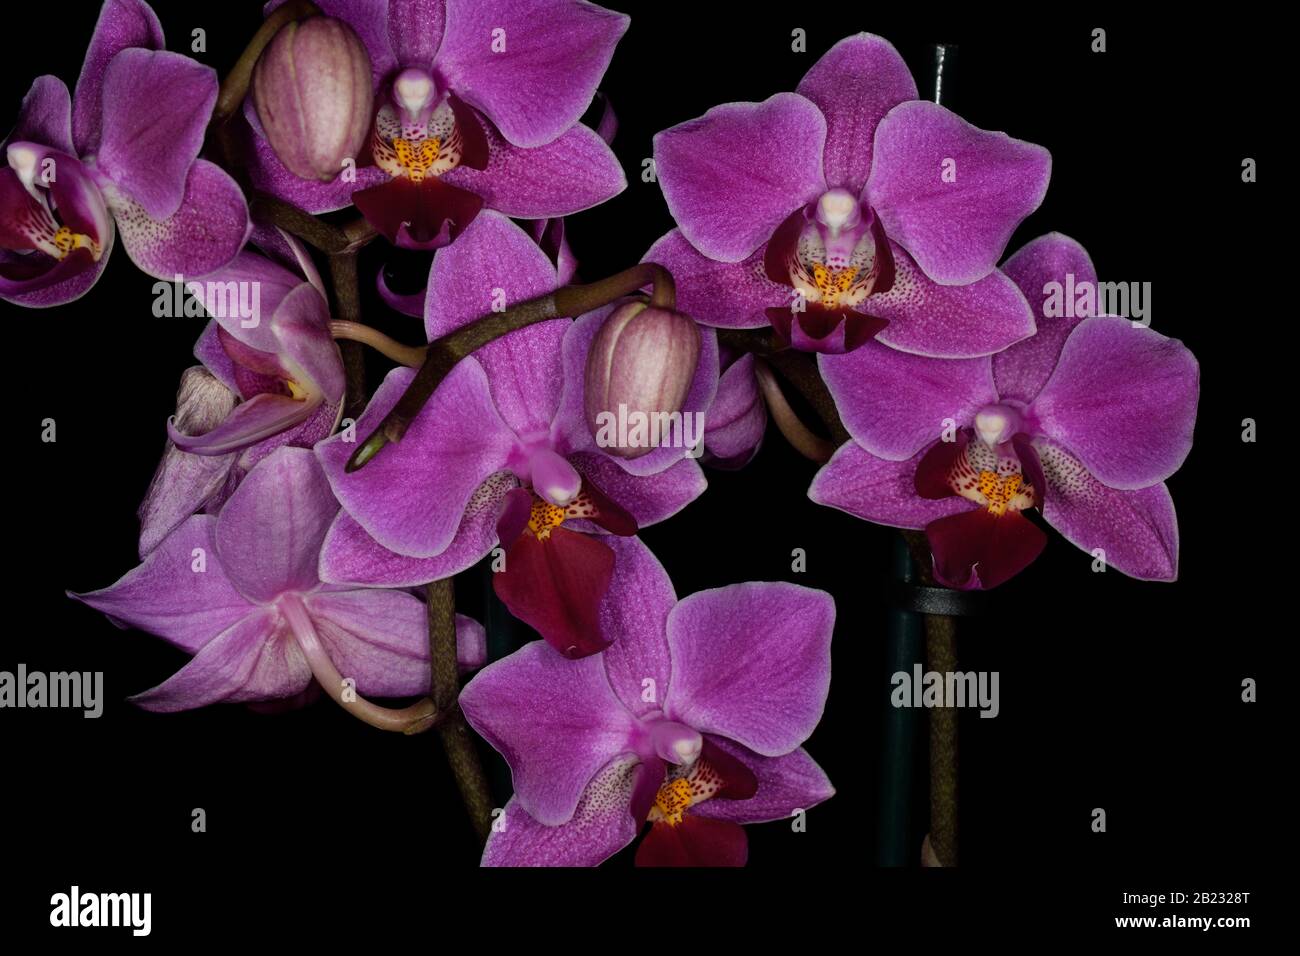 Phalaenopsis, orchids. Several closeup of mauve flowers with darker centres. Pot plant. Stock Photo